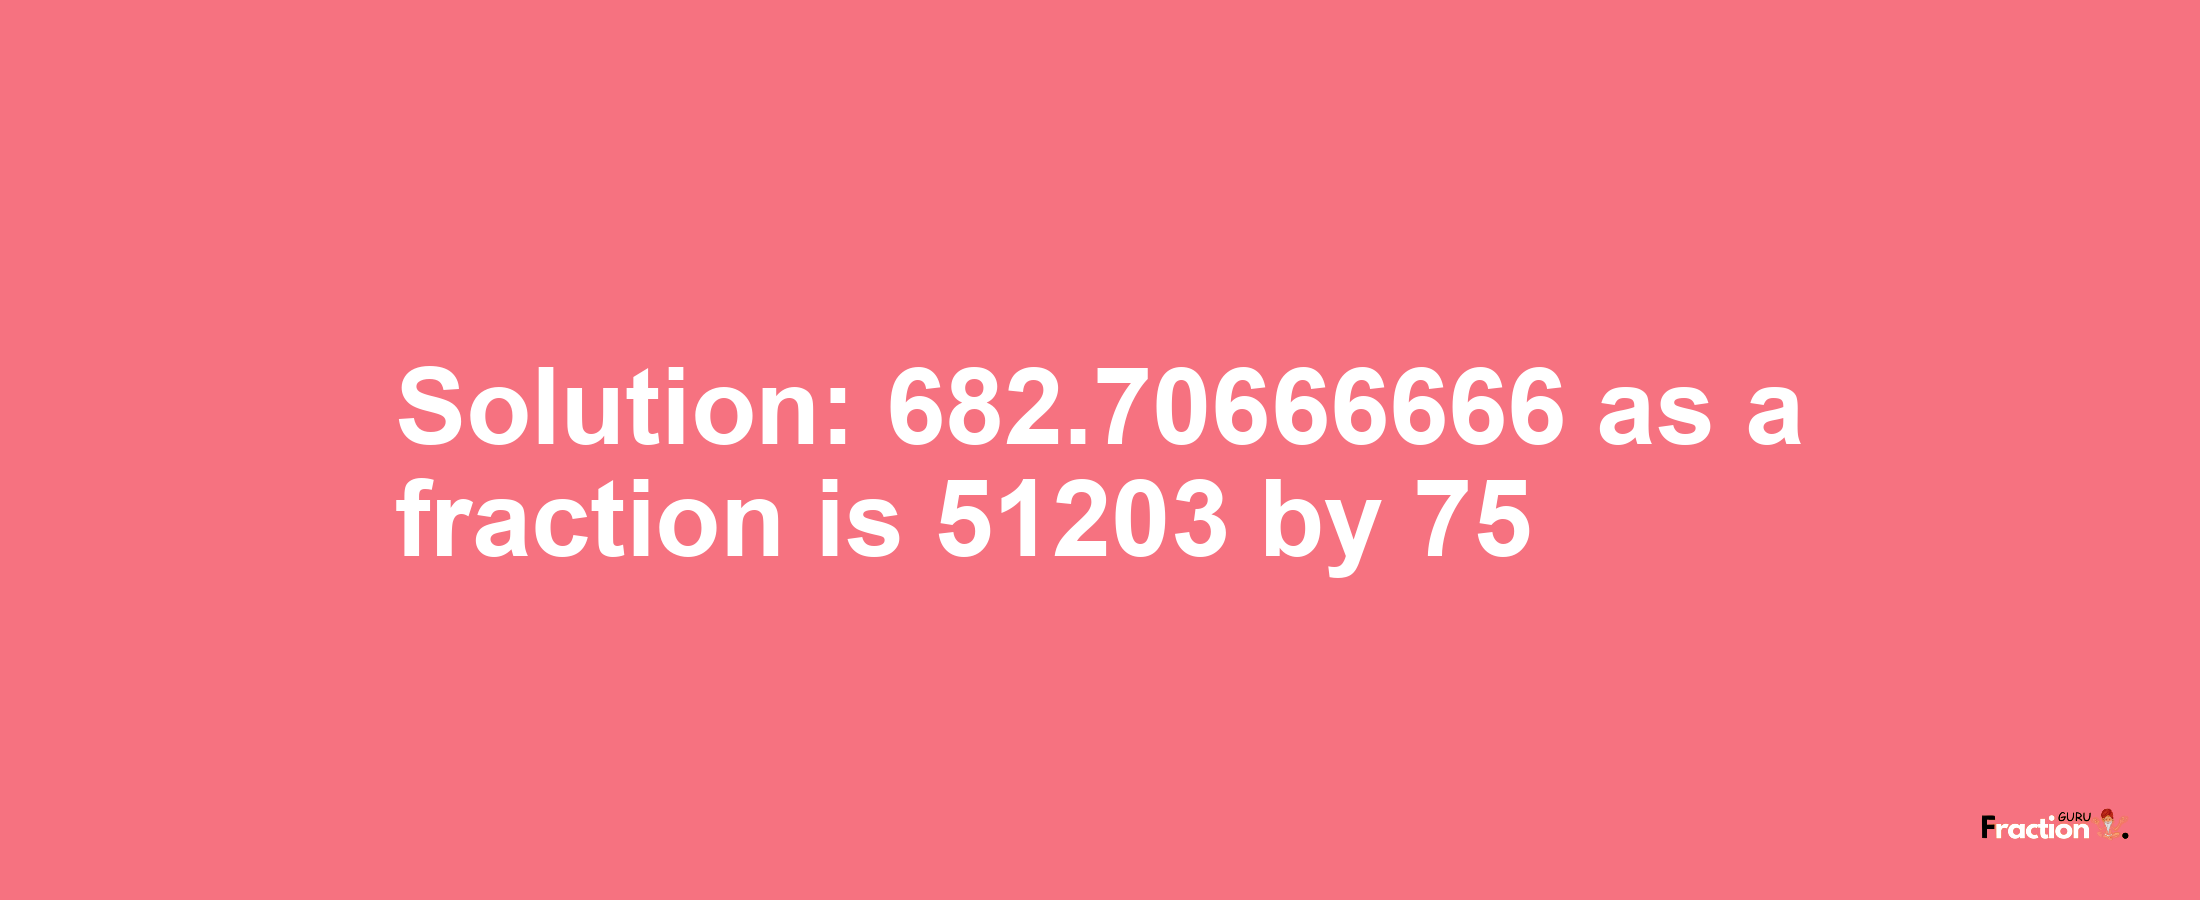 Solution:682.70666666 as a fraction is 51203/75